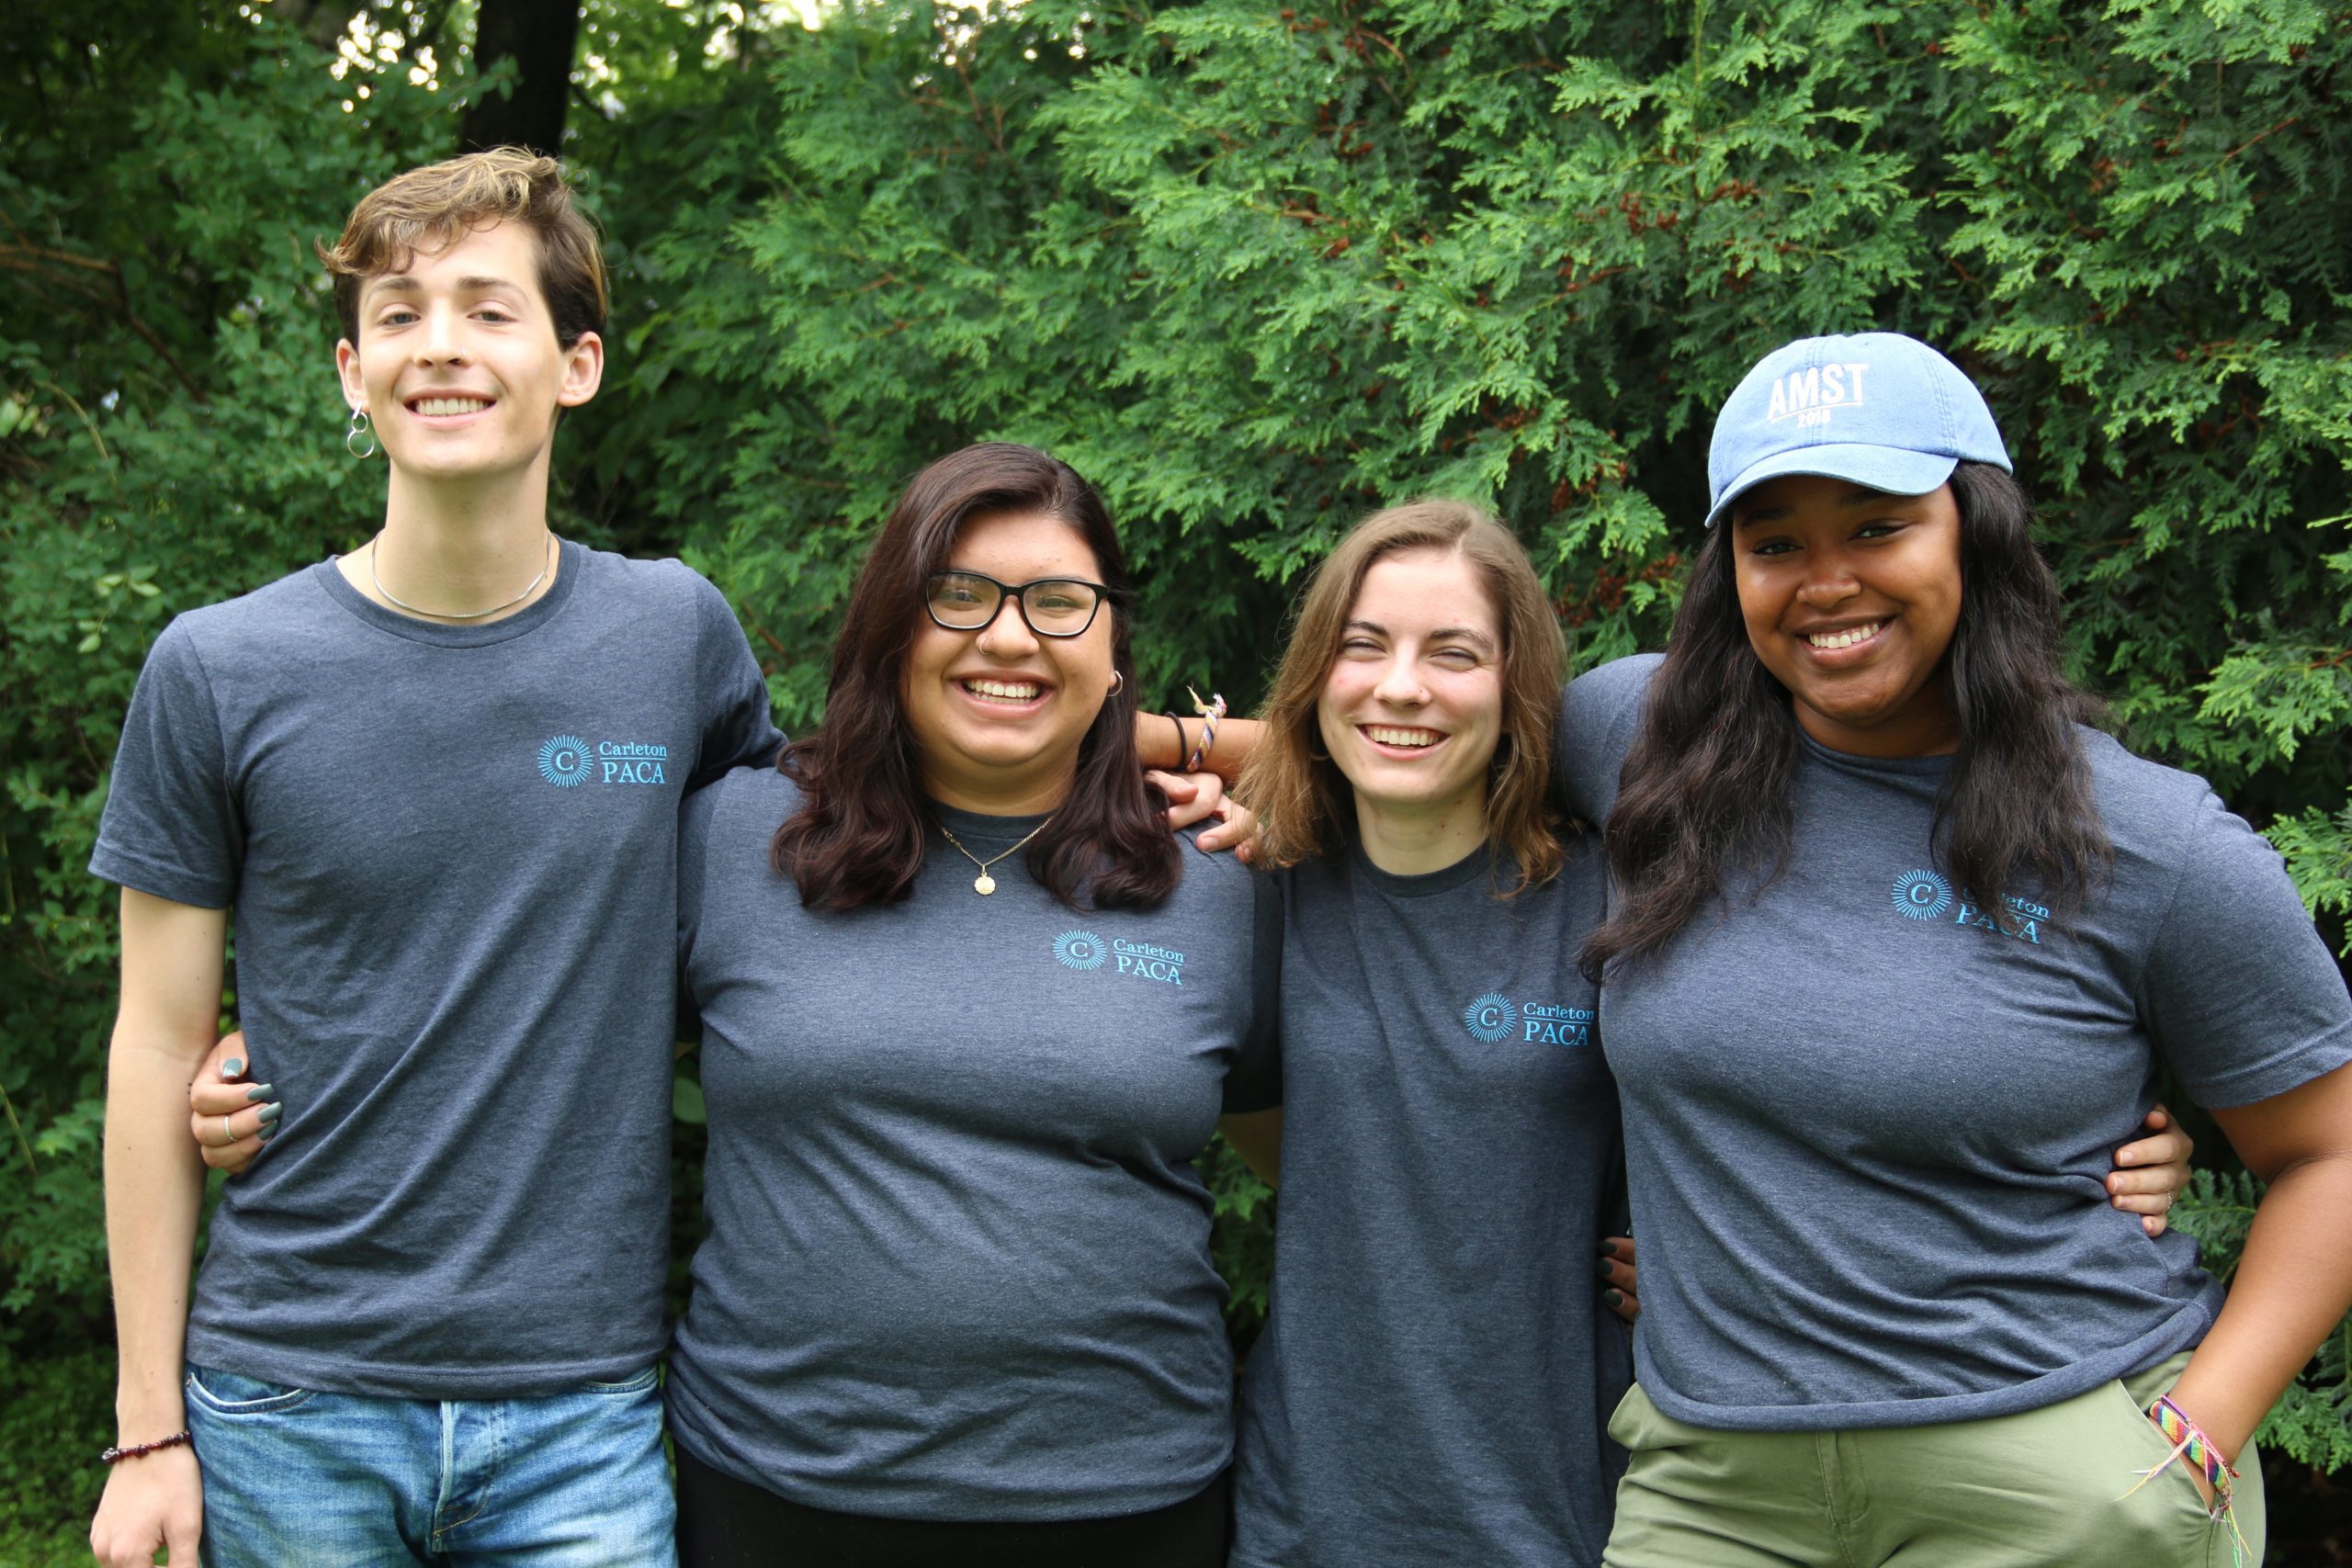 Four Program and Community Assistants wearing grey staff shirts and smiling